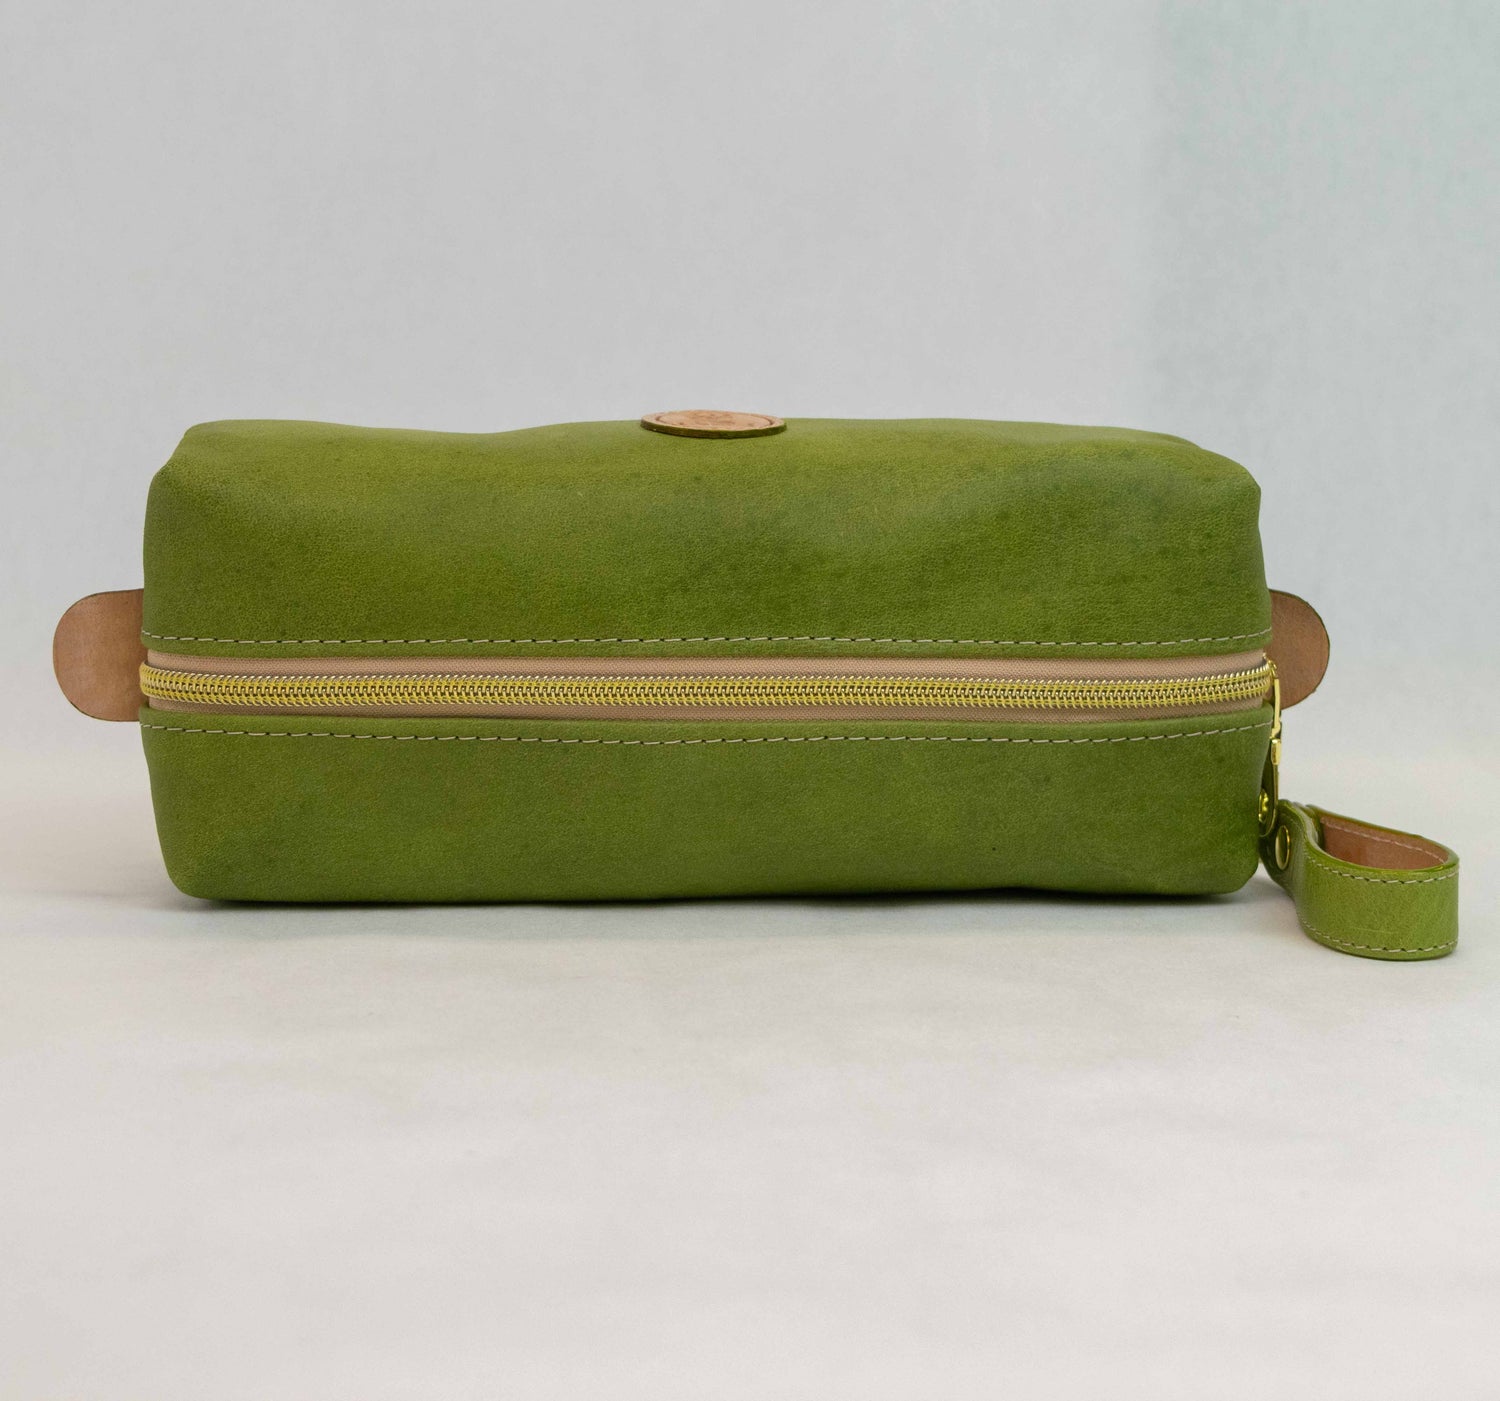 Top view of T5 bath dopp kit toiletry wash bag designer handcrafted of smooth calf leather in vintage aloe green.